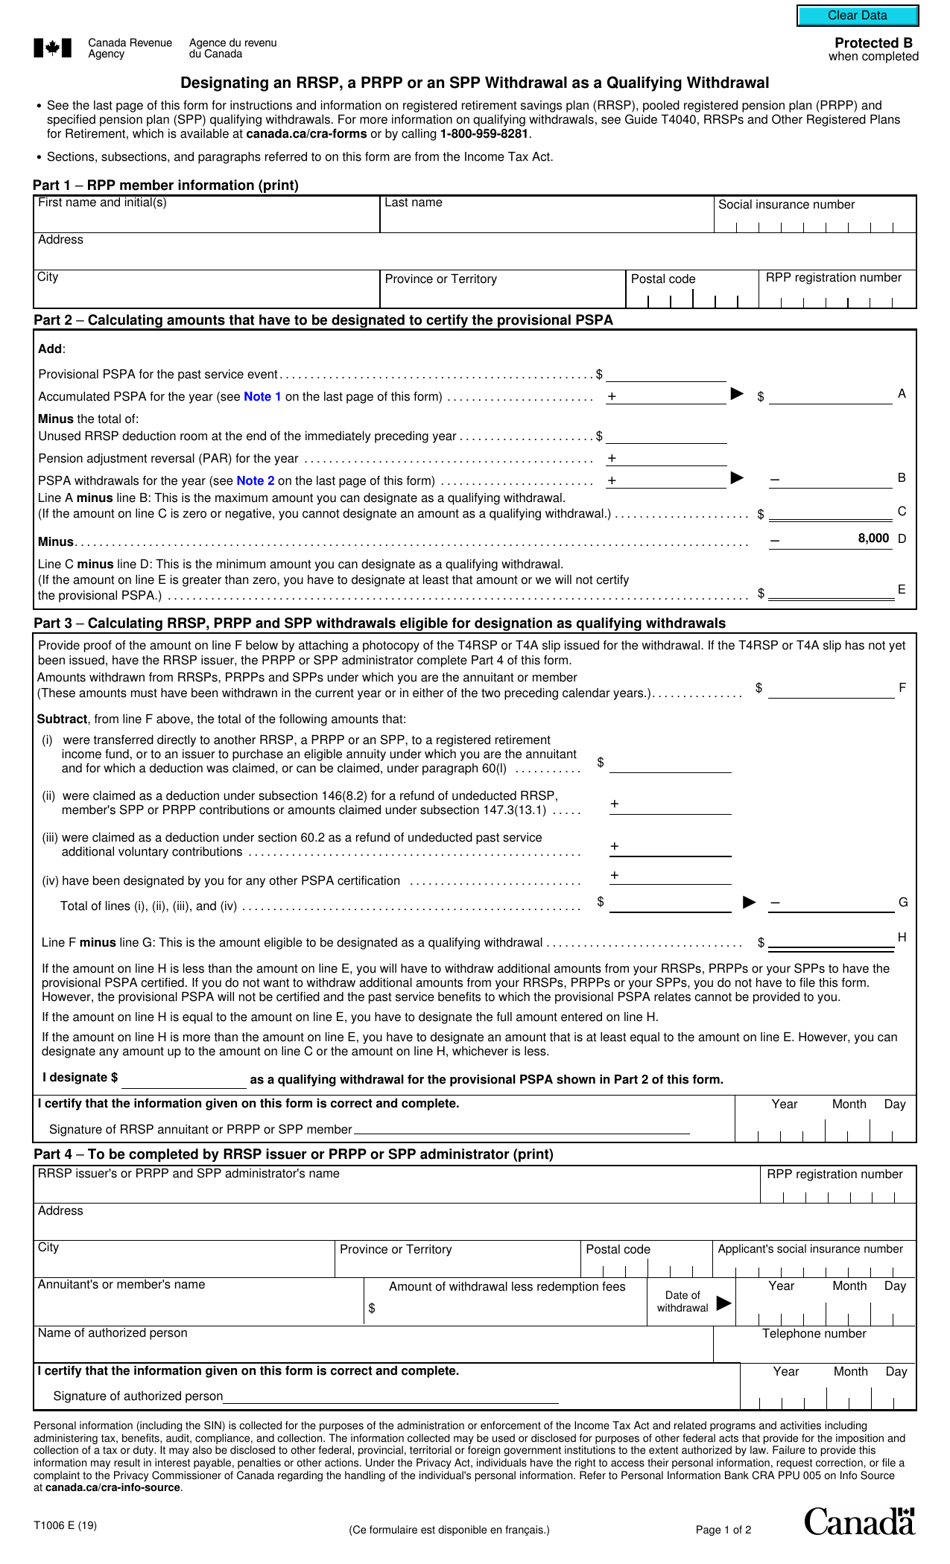 Form T1006 Designating an Rrsp, an Prpp or an Spp Withdrawal as a Qualifying Withdrawal - Canada, Page 1